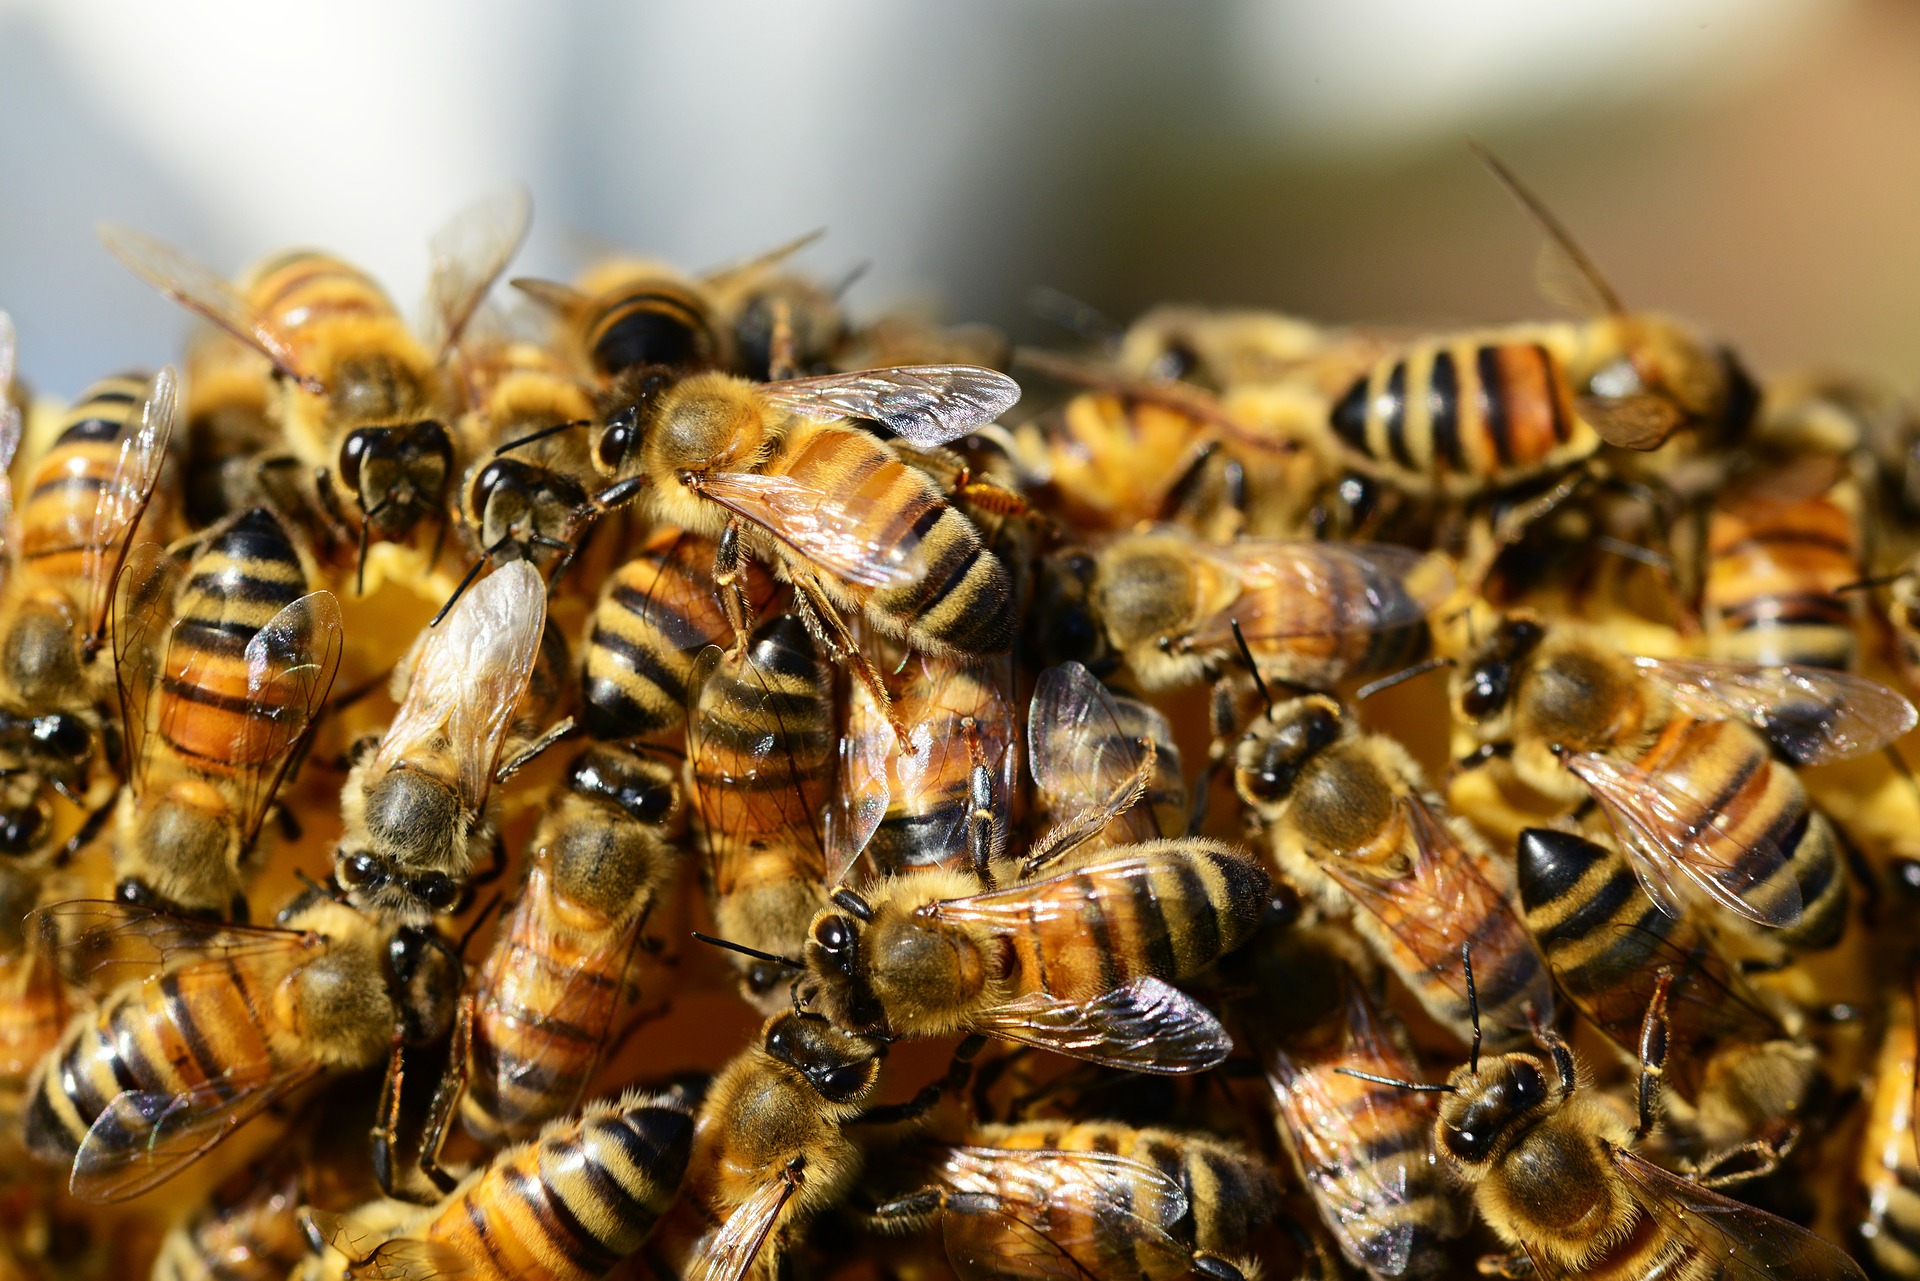 21 Buzzworthy Facts About Bees